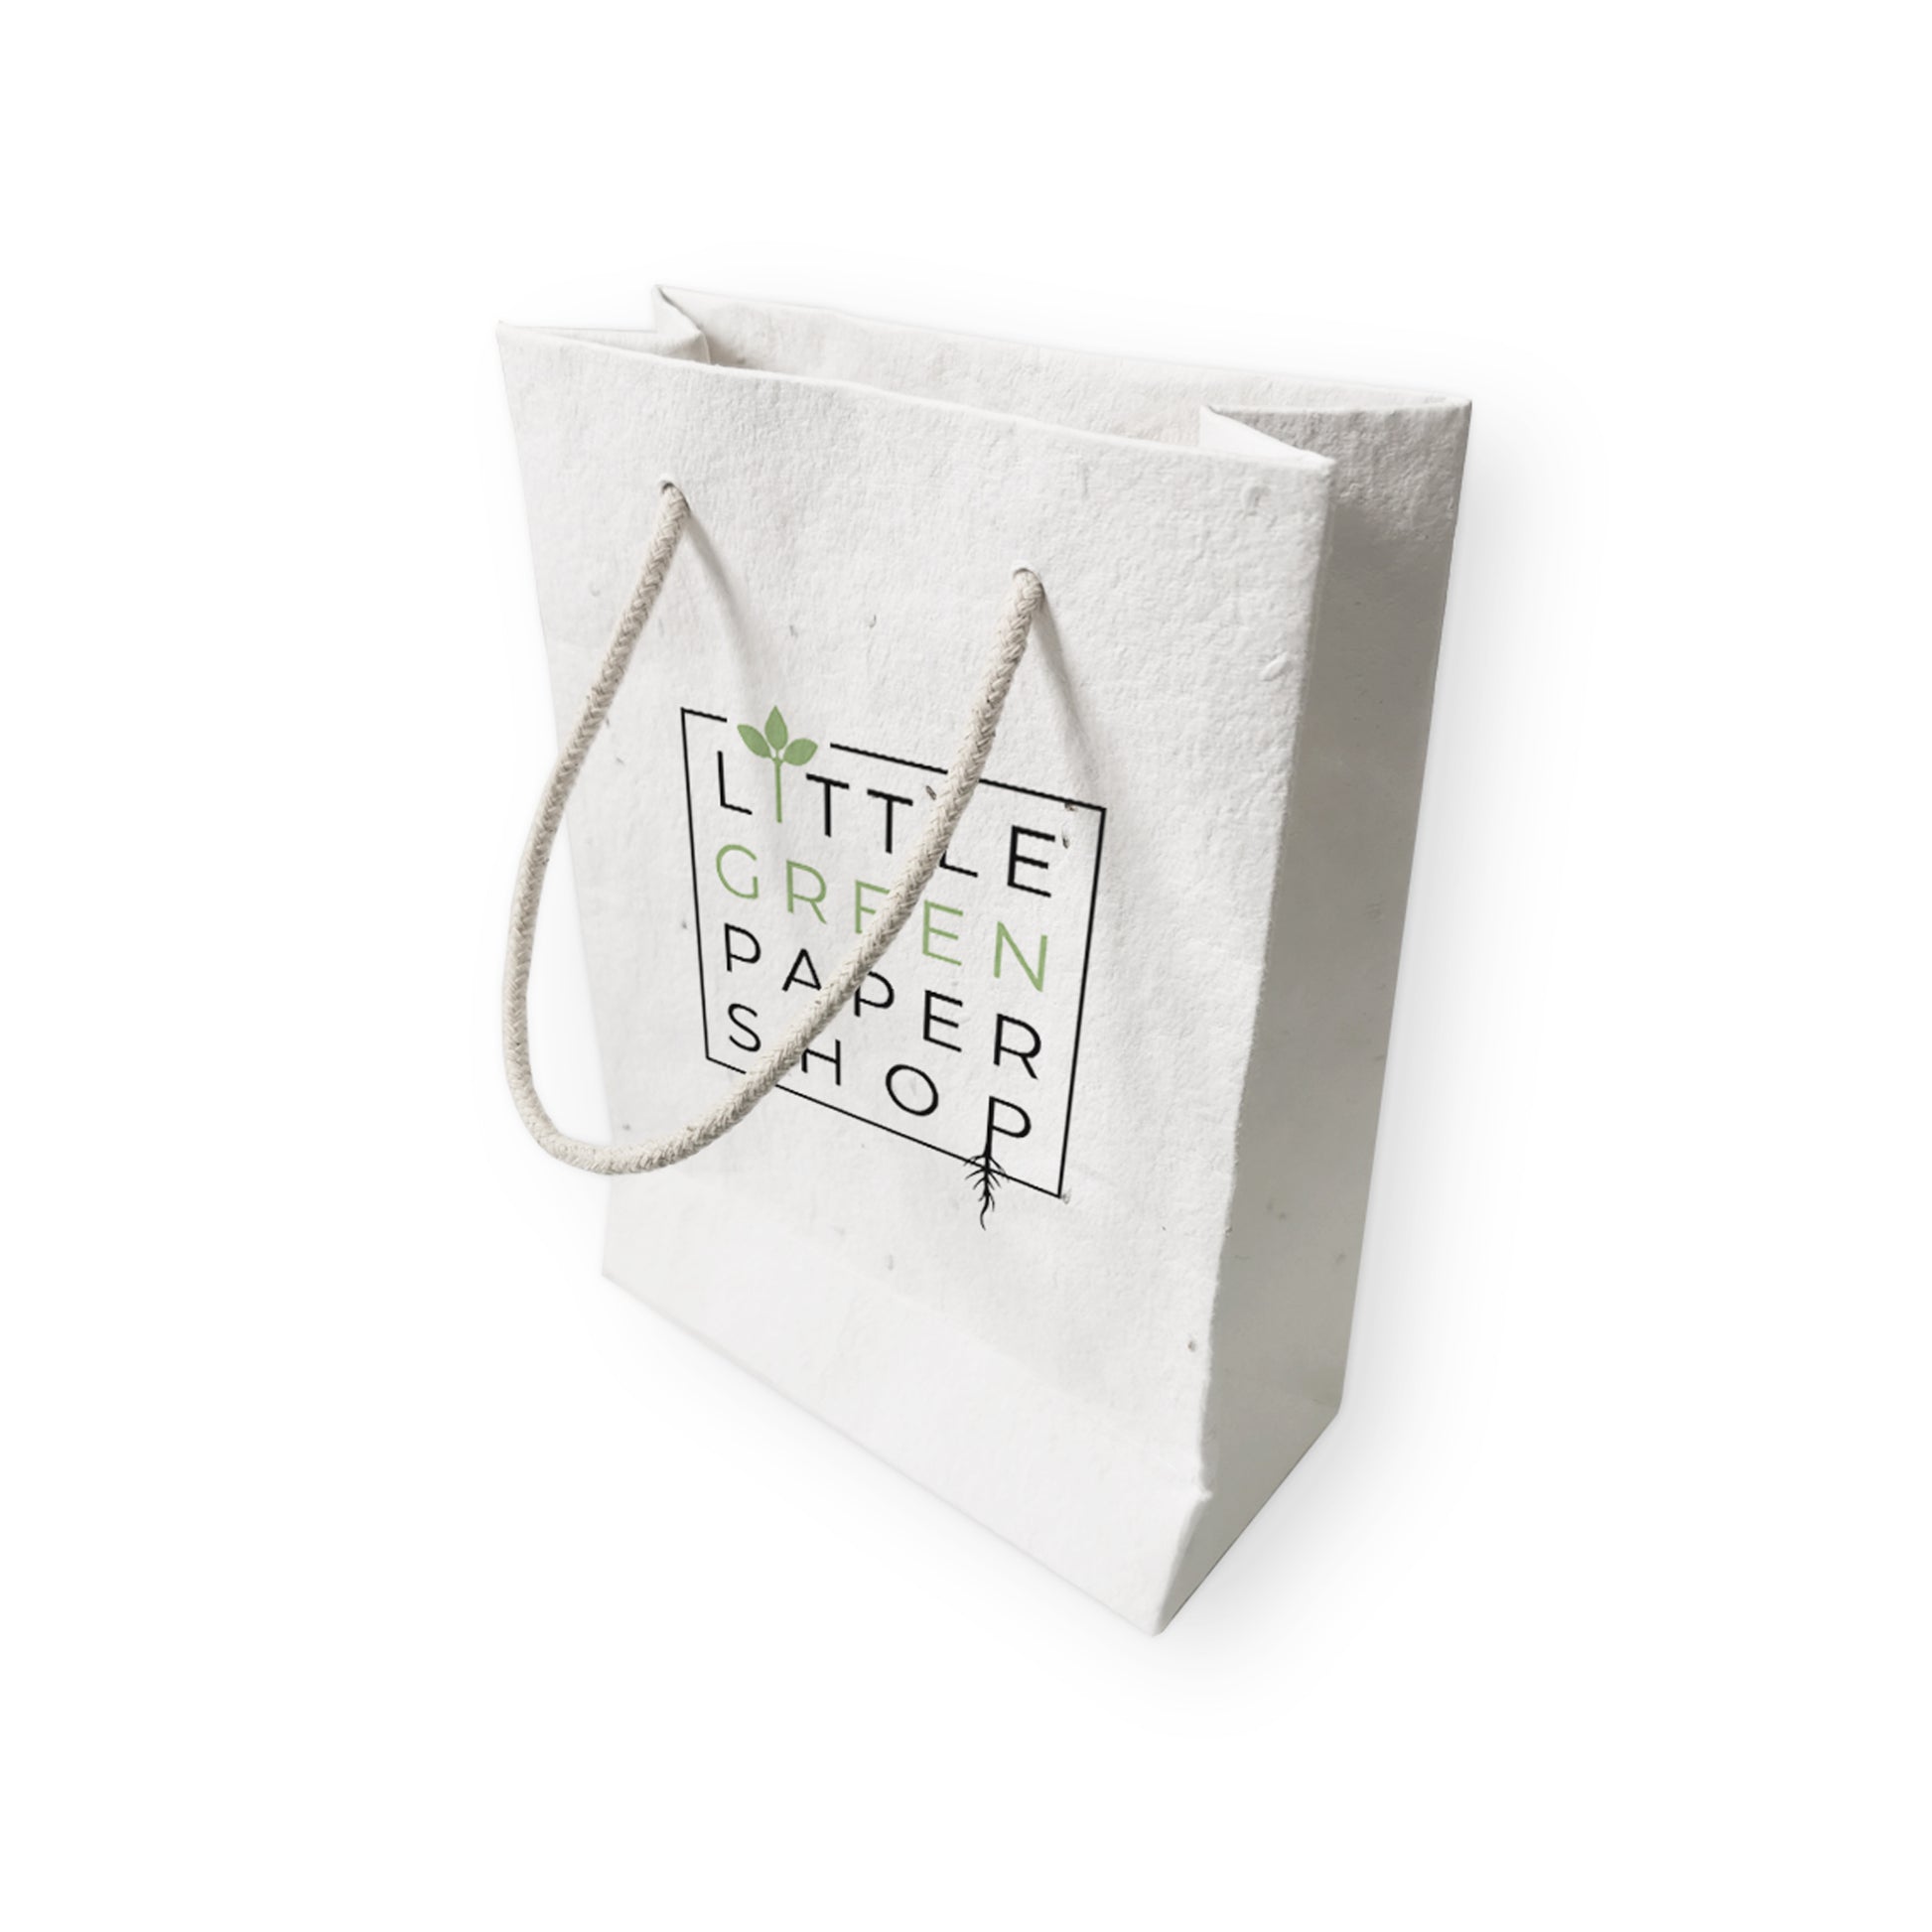 Plantable Seed Paper Seed Paper Gift Bag - Small  Little Green Paper Shop